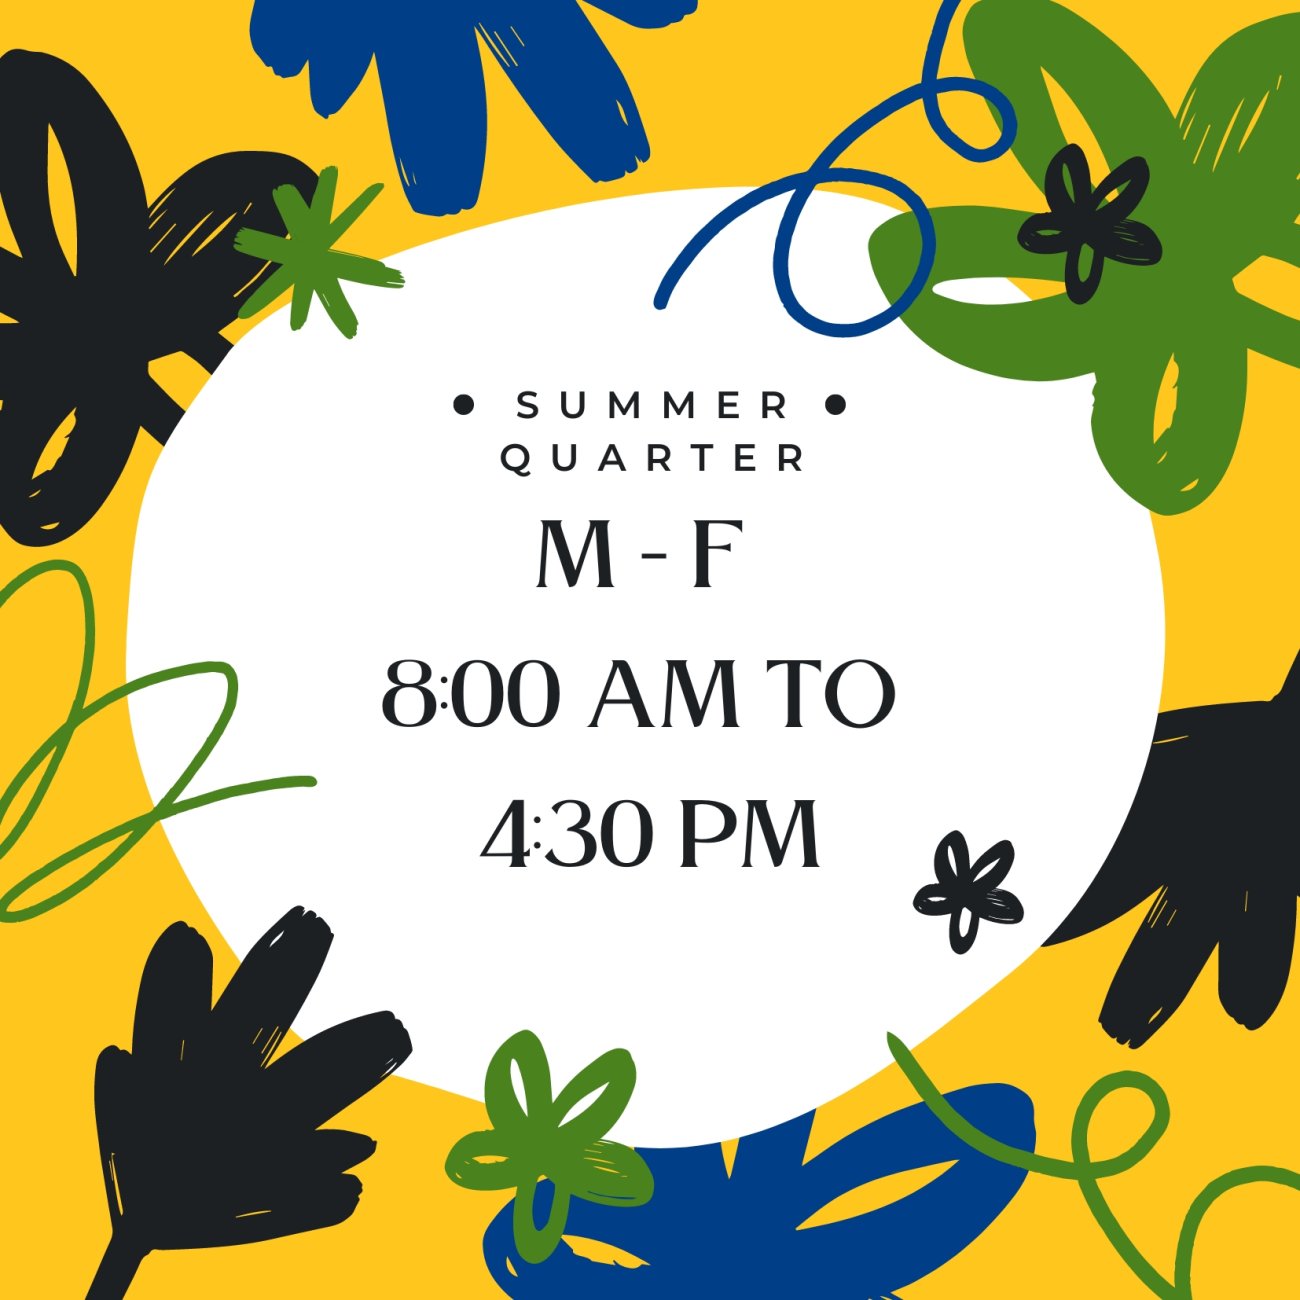 Yellow square post with brush stroke flowers and squiggles in green, blue, and black. In the middle there is an imperfect white circle that states the new hours for the psychology department: monday through friday from 8 am to 4:30 pm